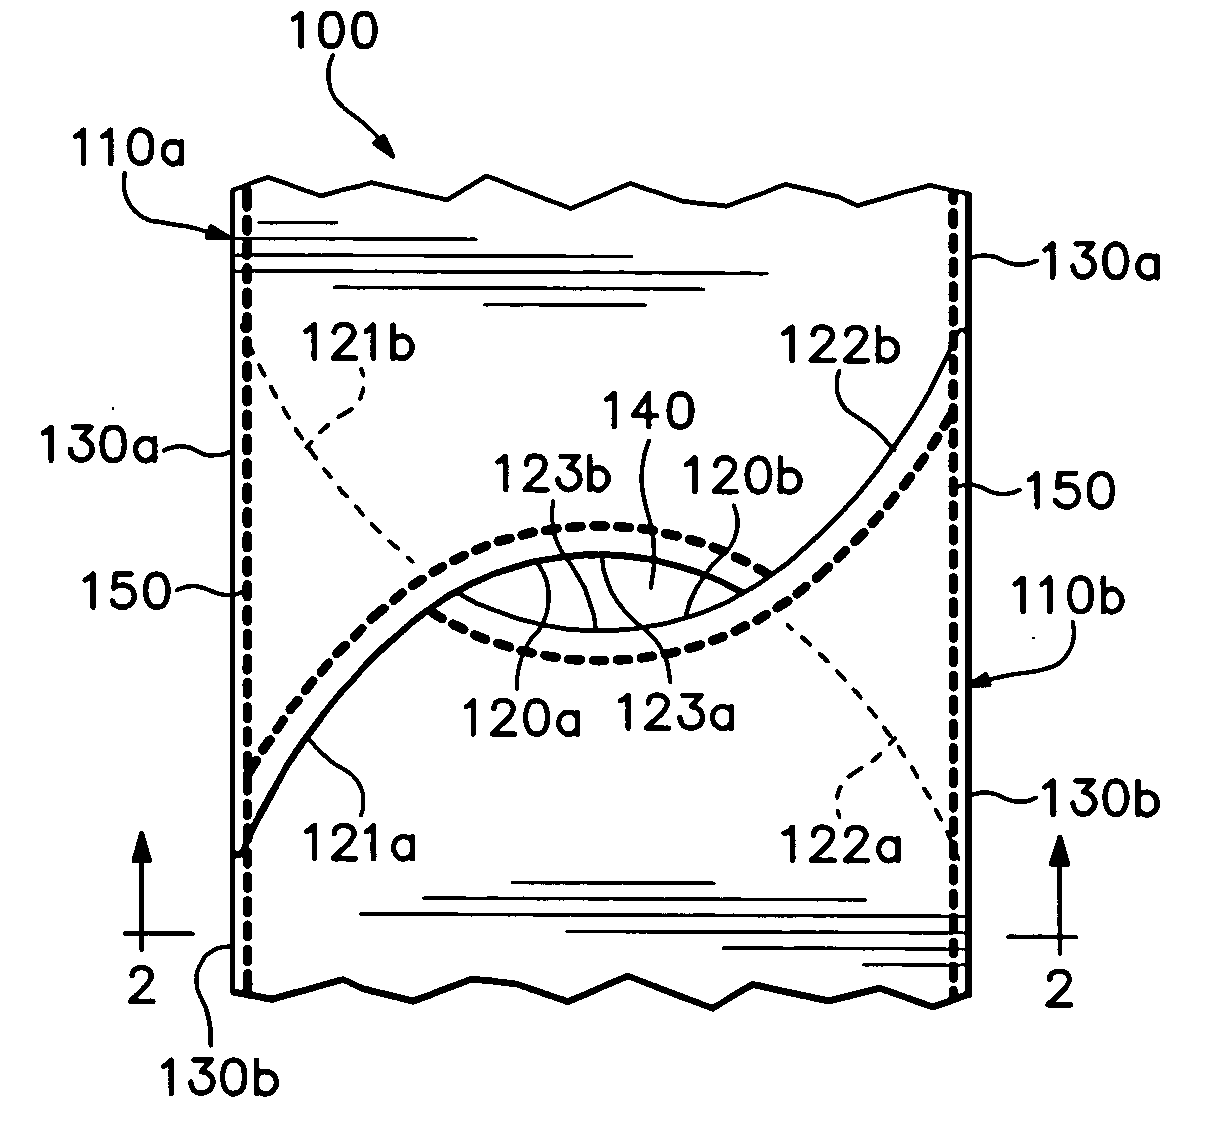 Overlapping element